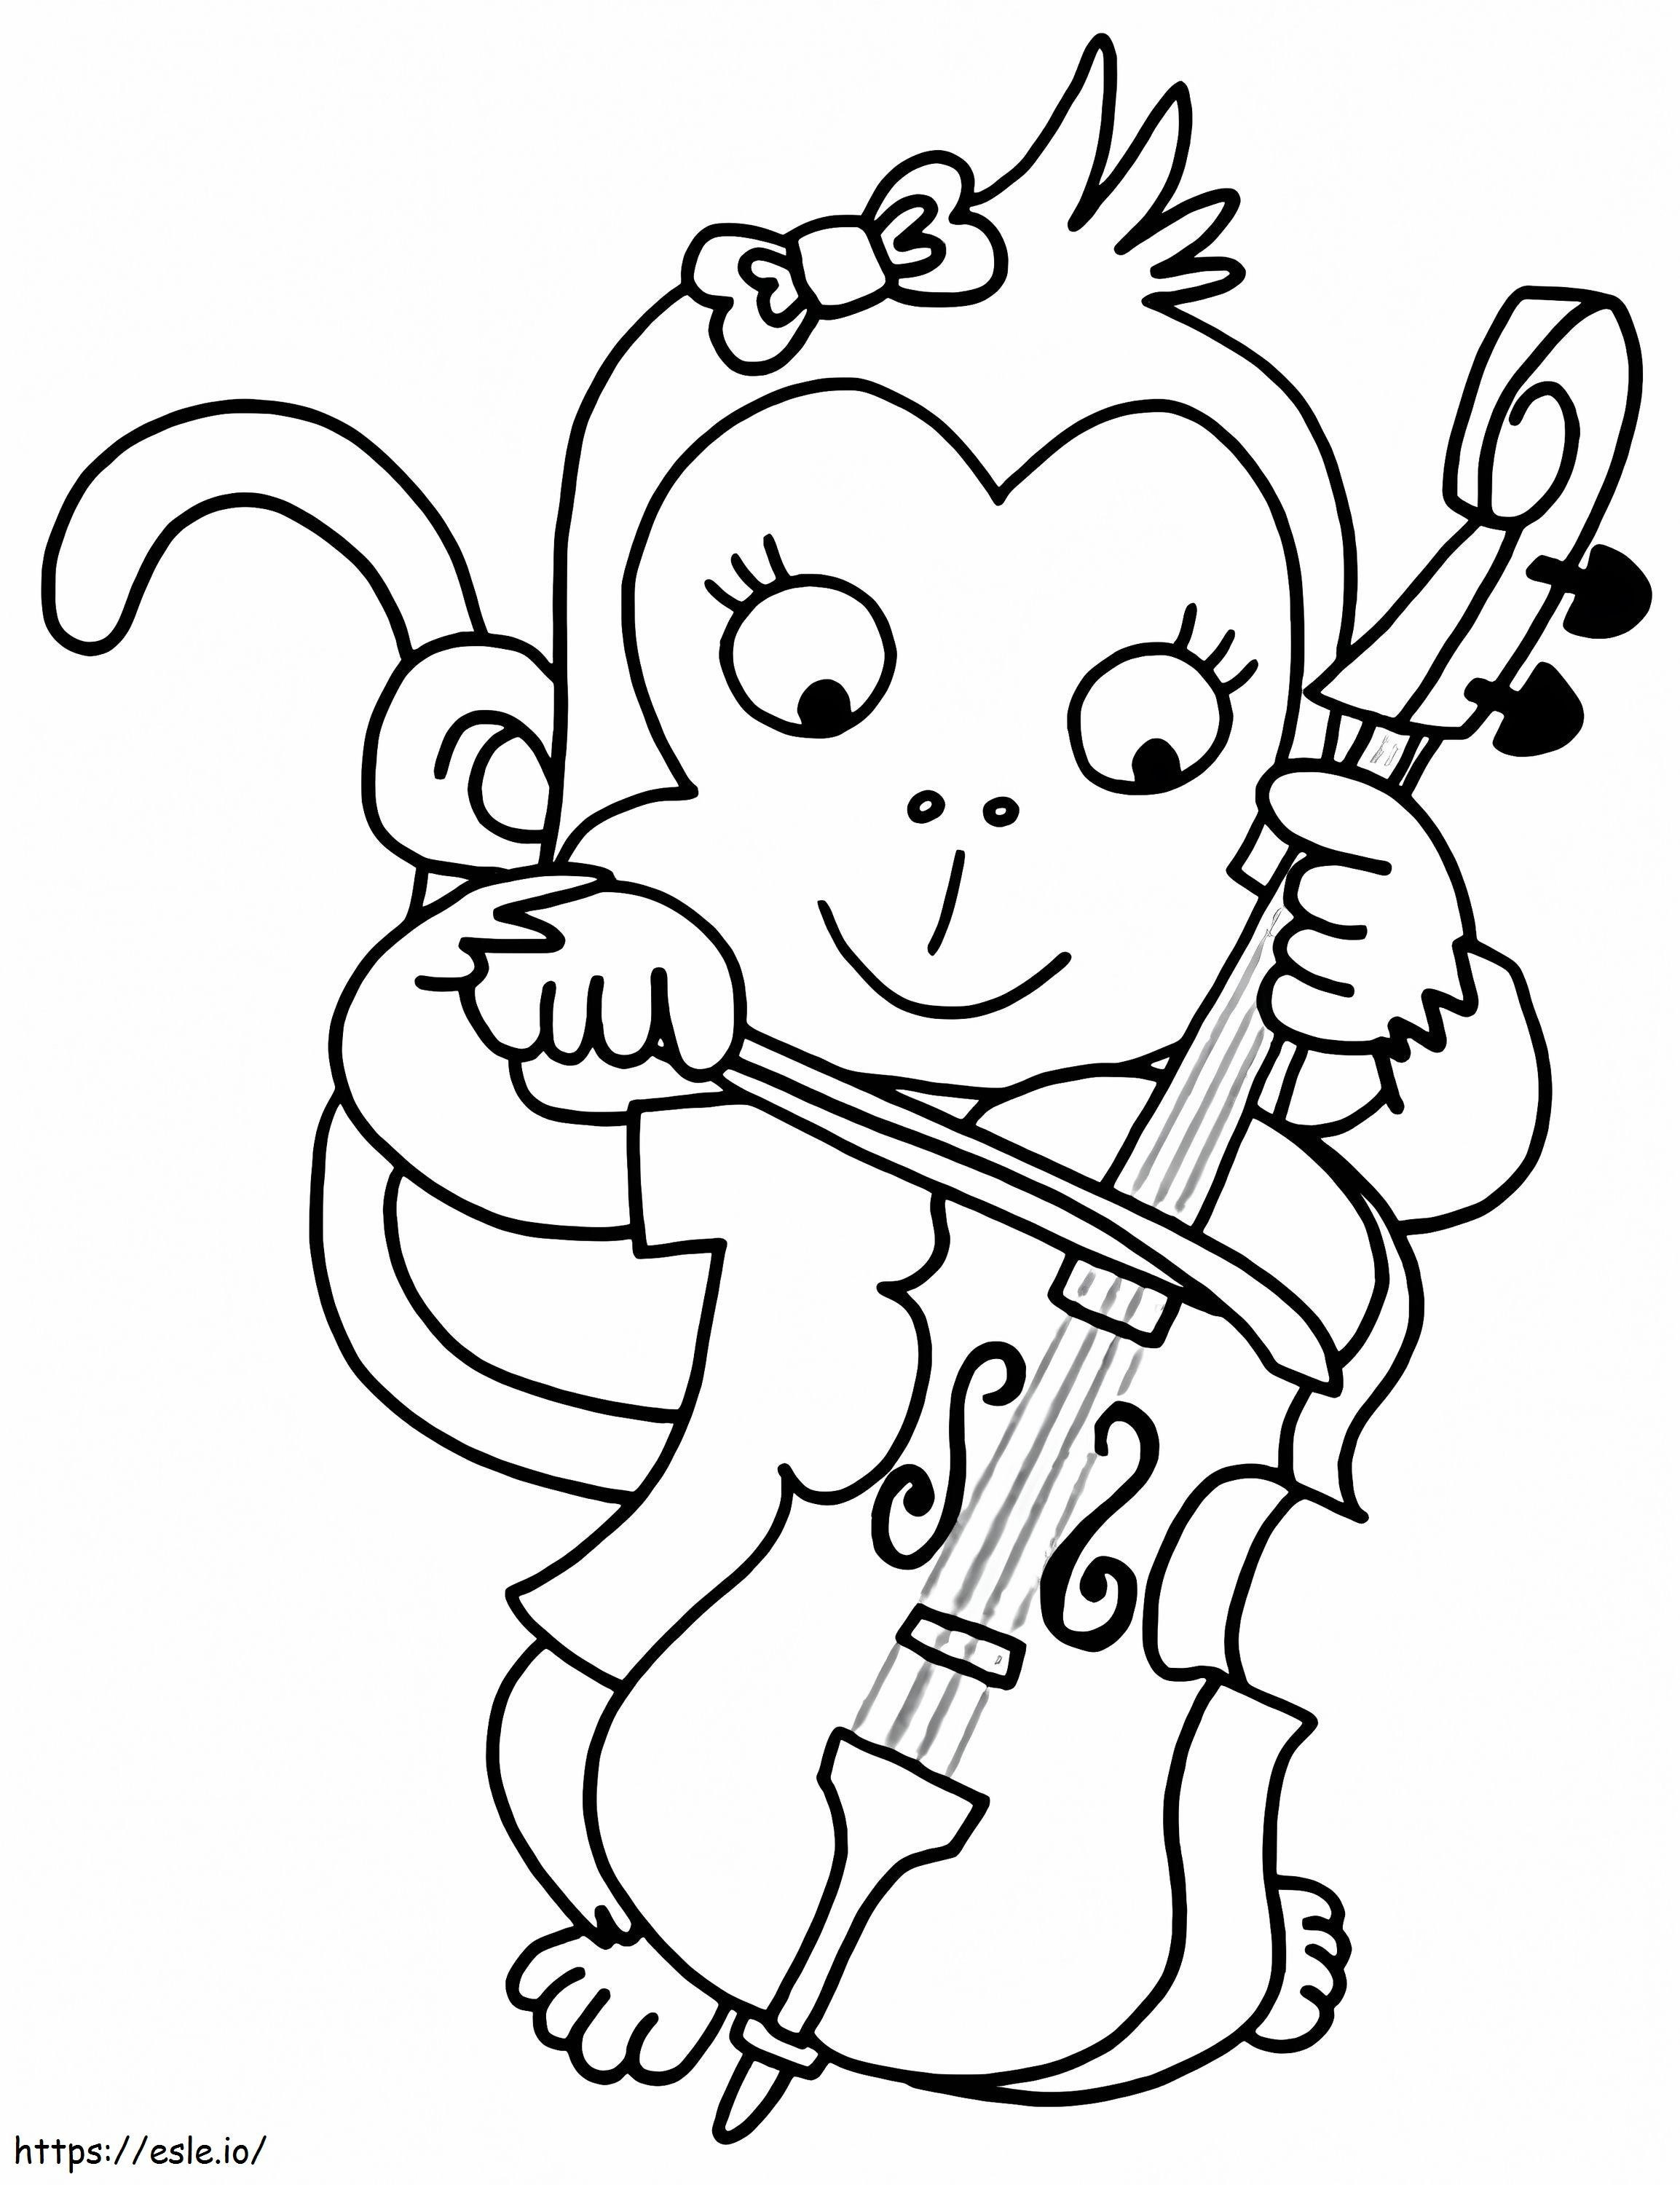 Monkey Playing Cello coloring page